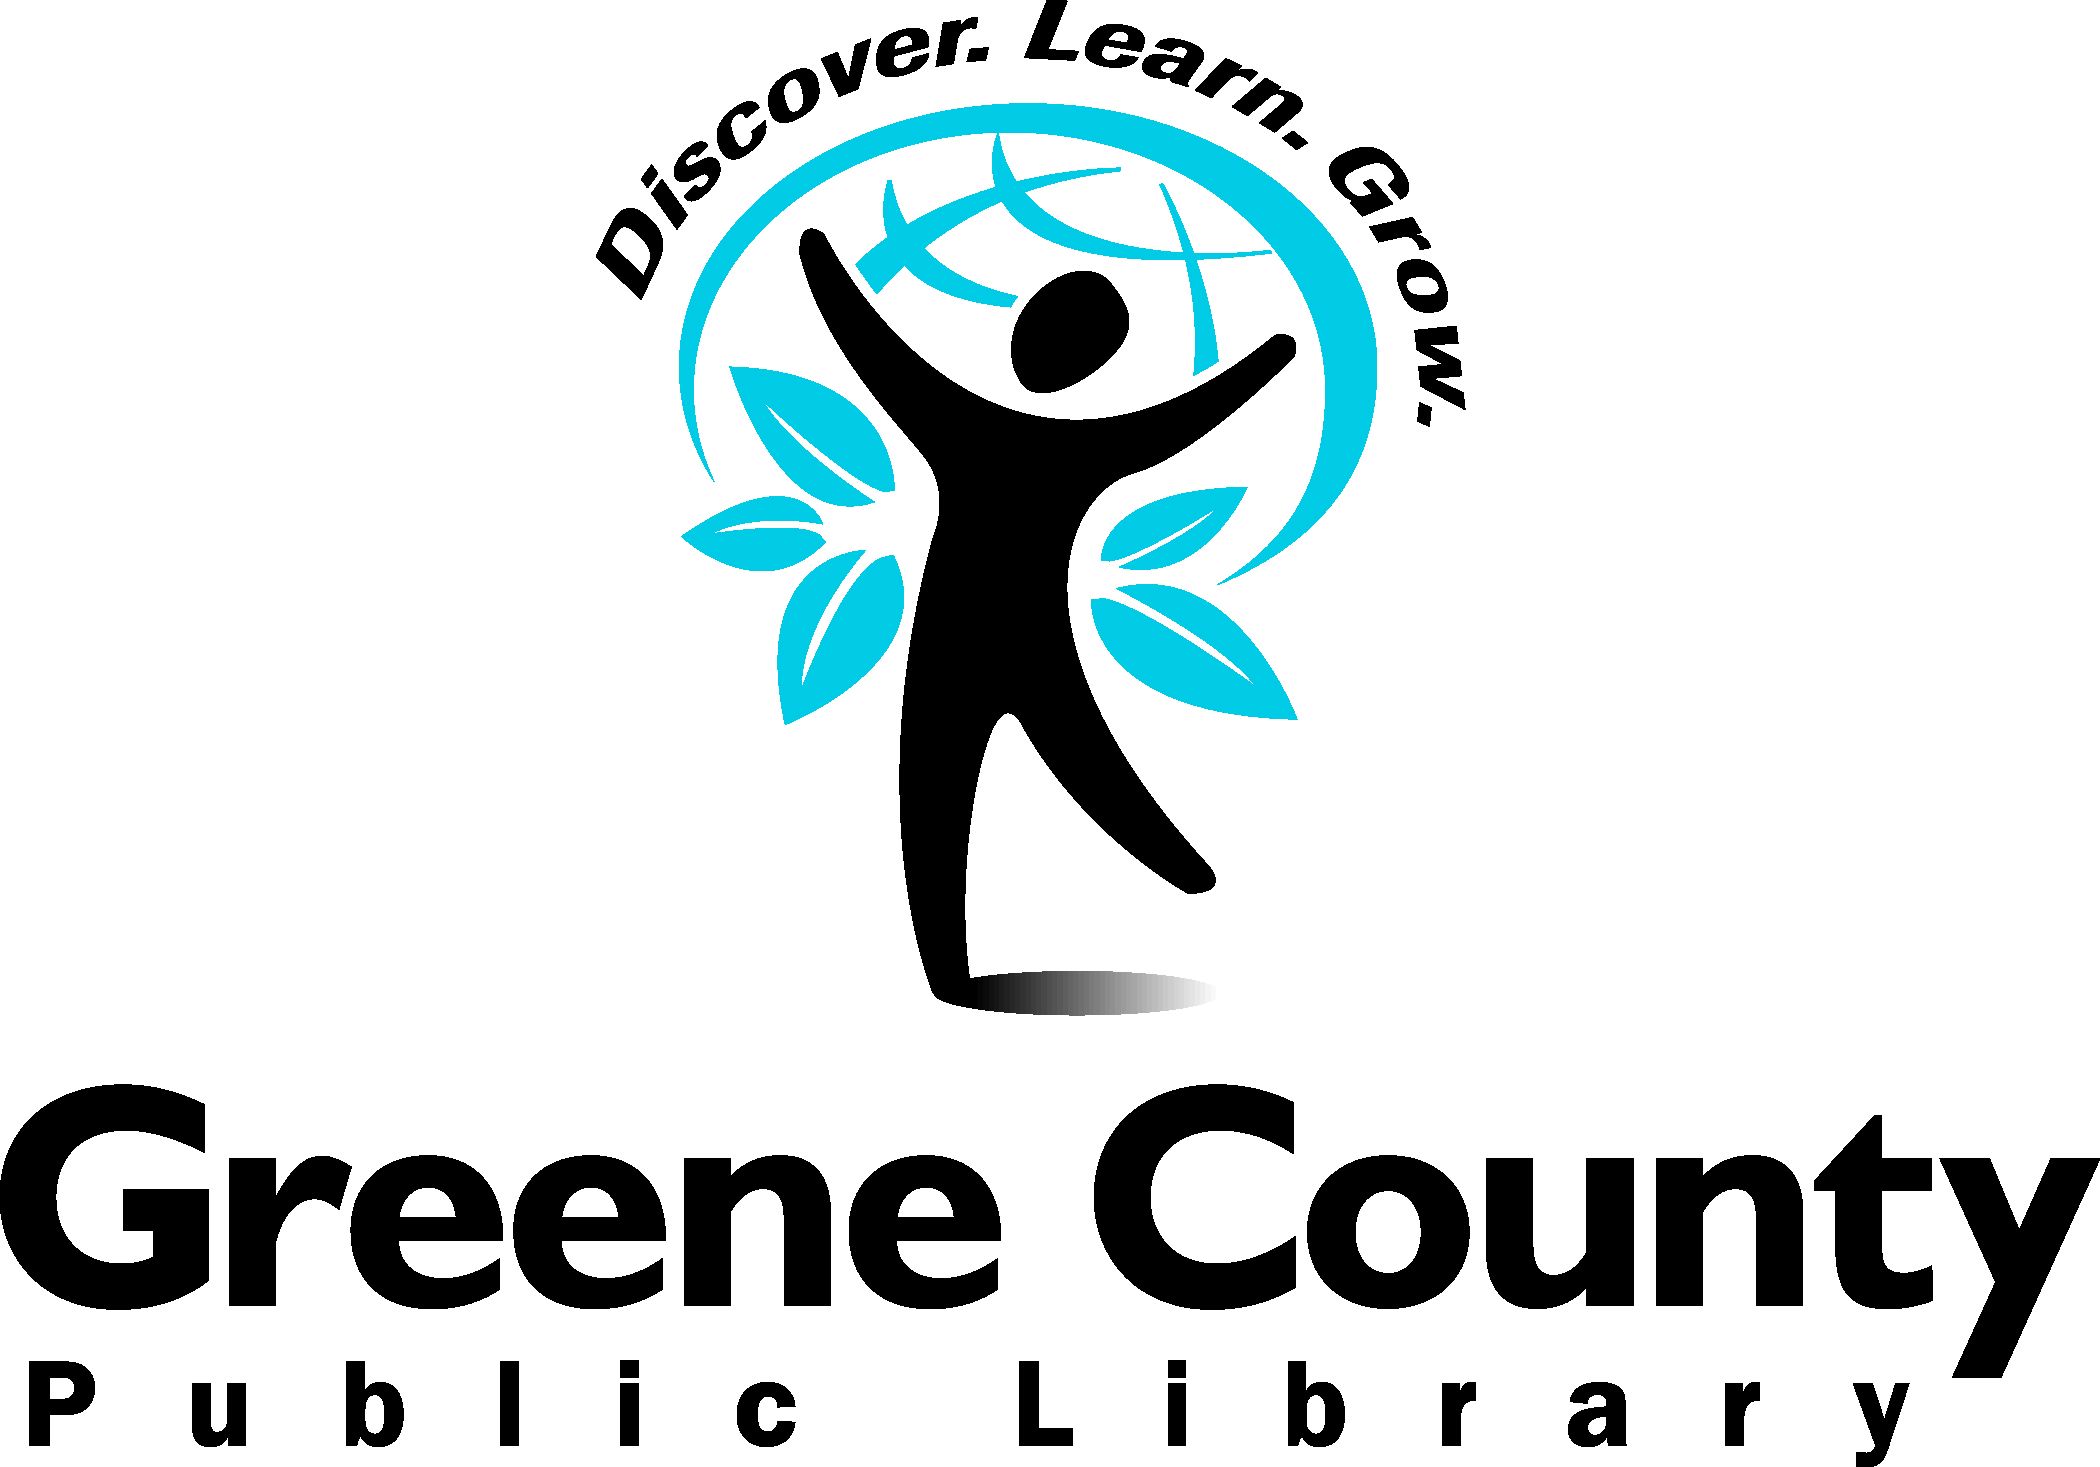 All Greene County Public Library locations to be closed through April 6th.